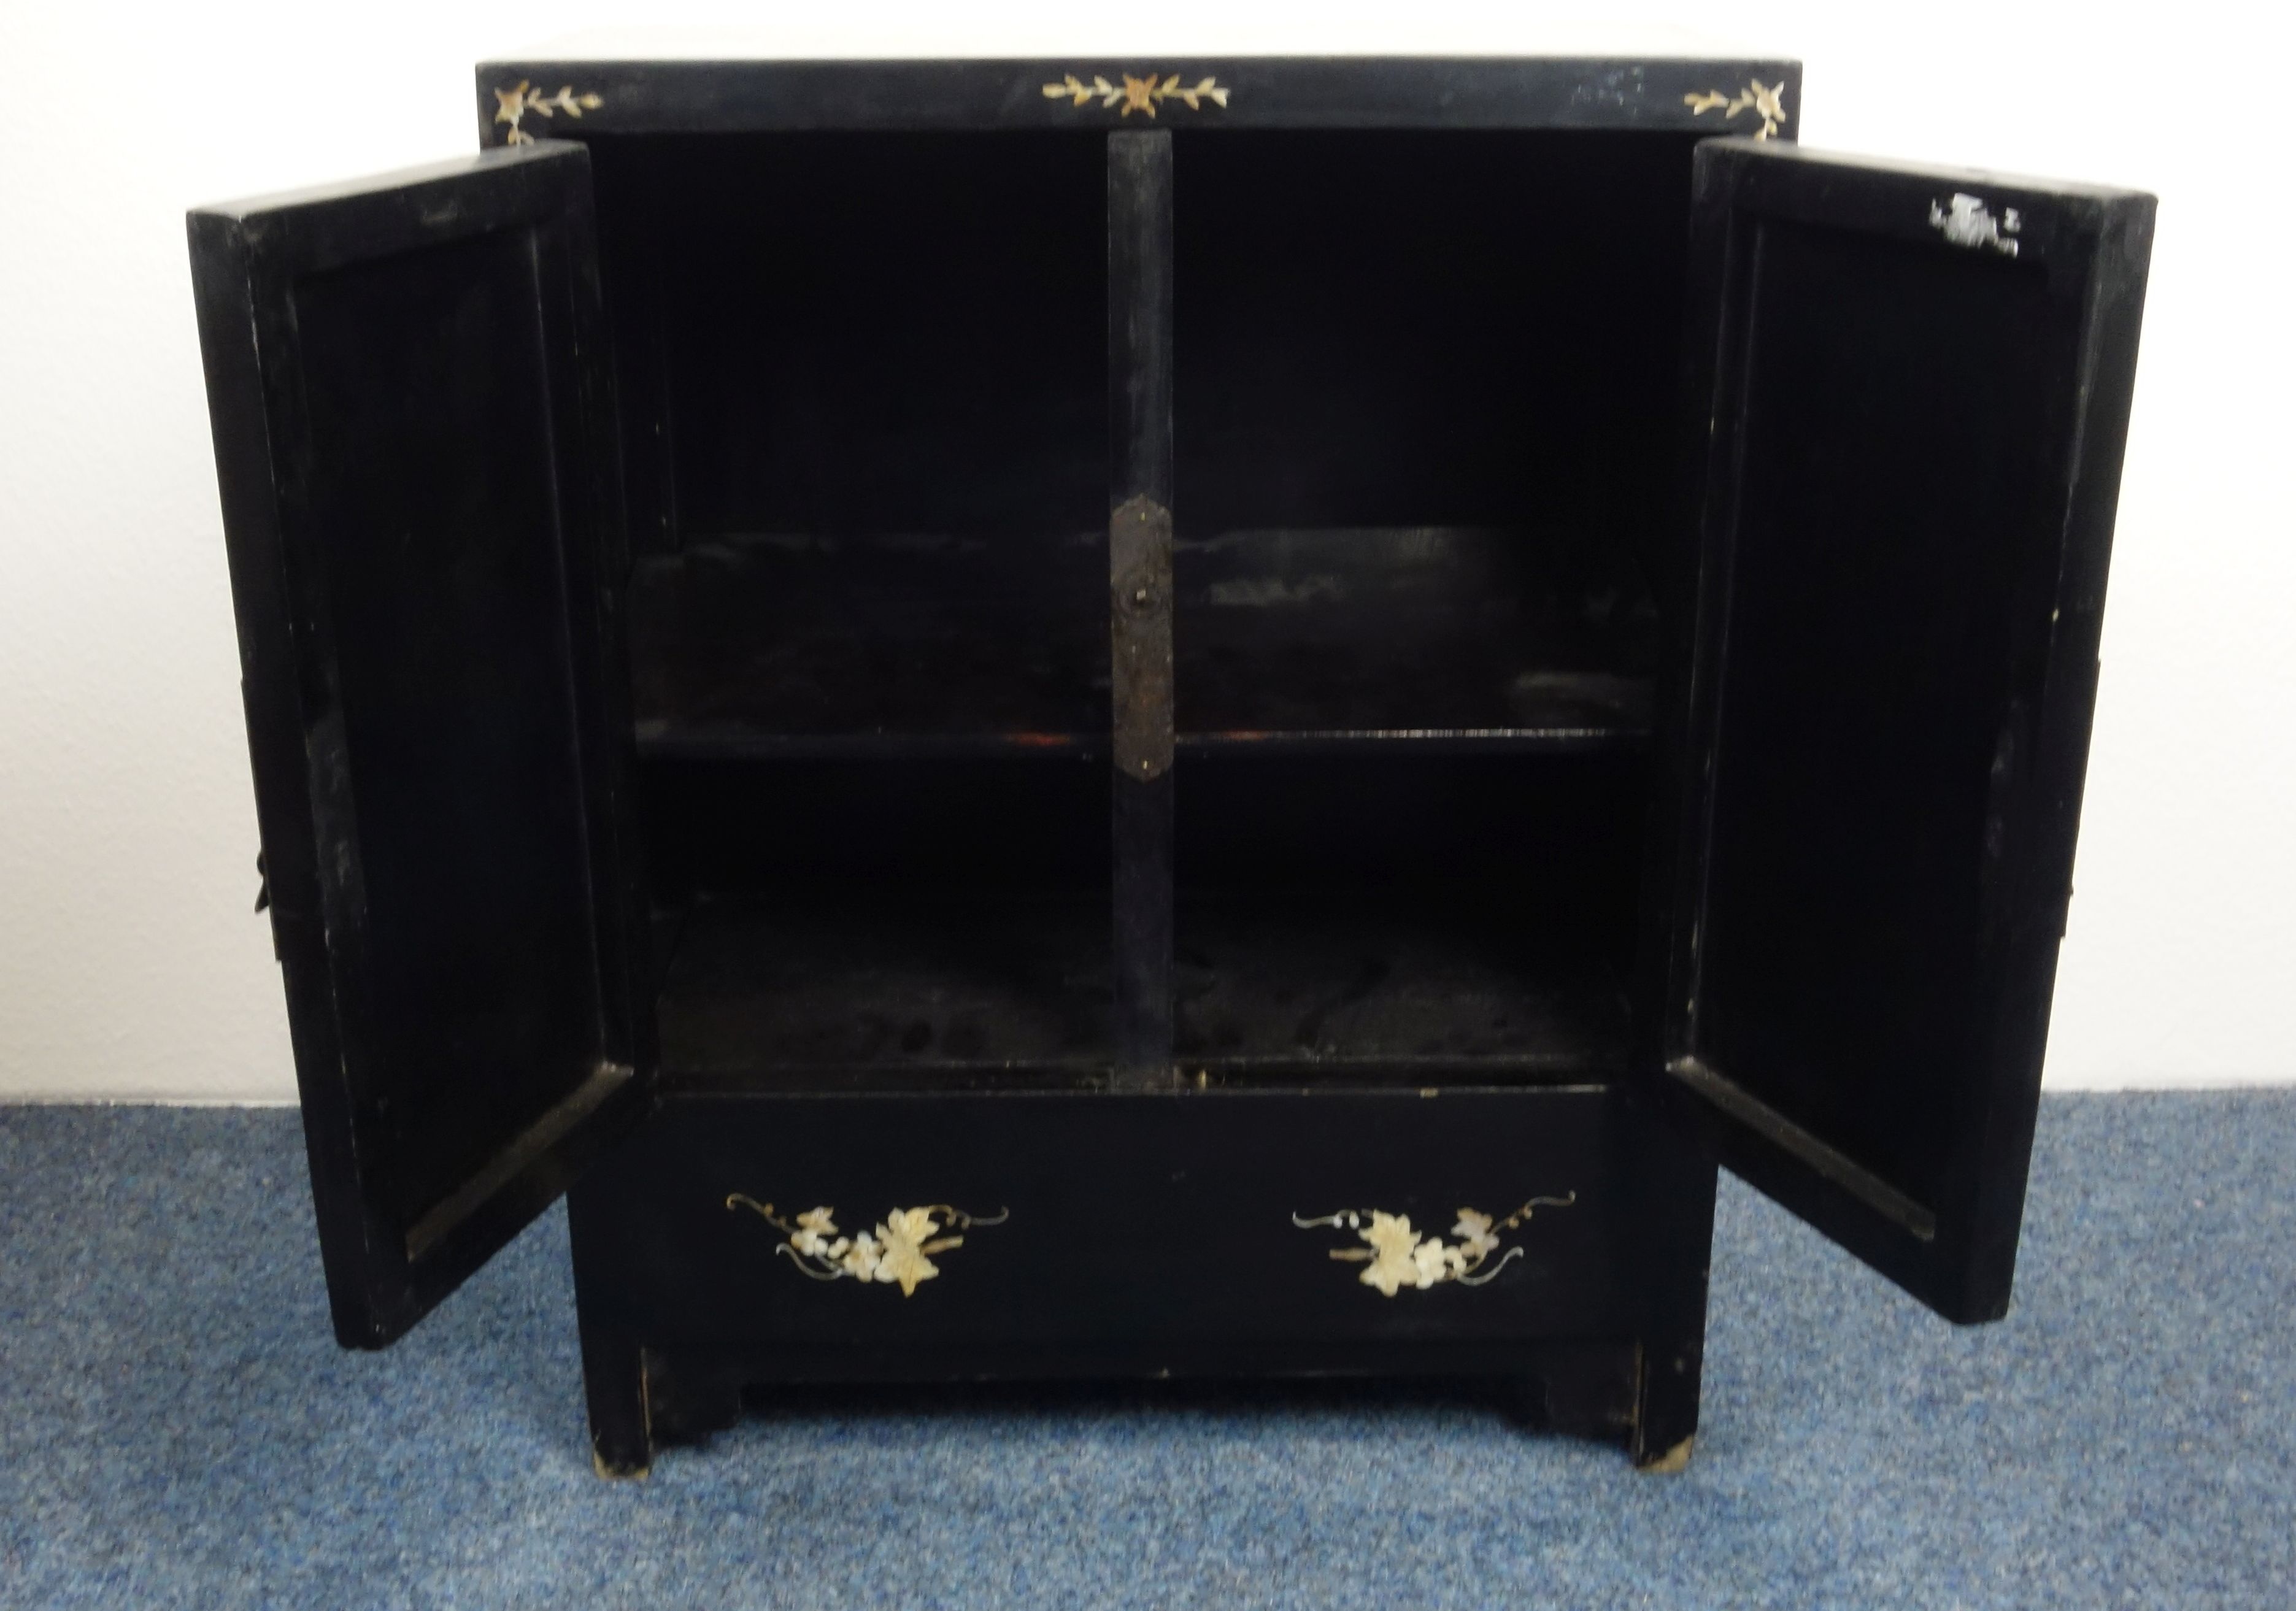 LACQUER CABINET WITH MOTHER OF PEARL MARKETERIES - Image 2 of 5